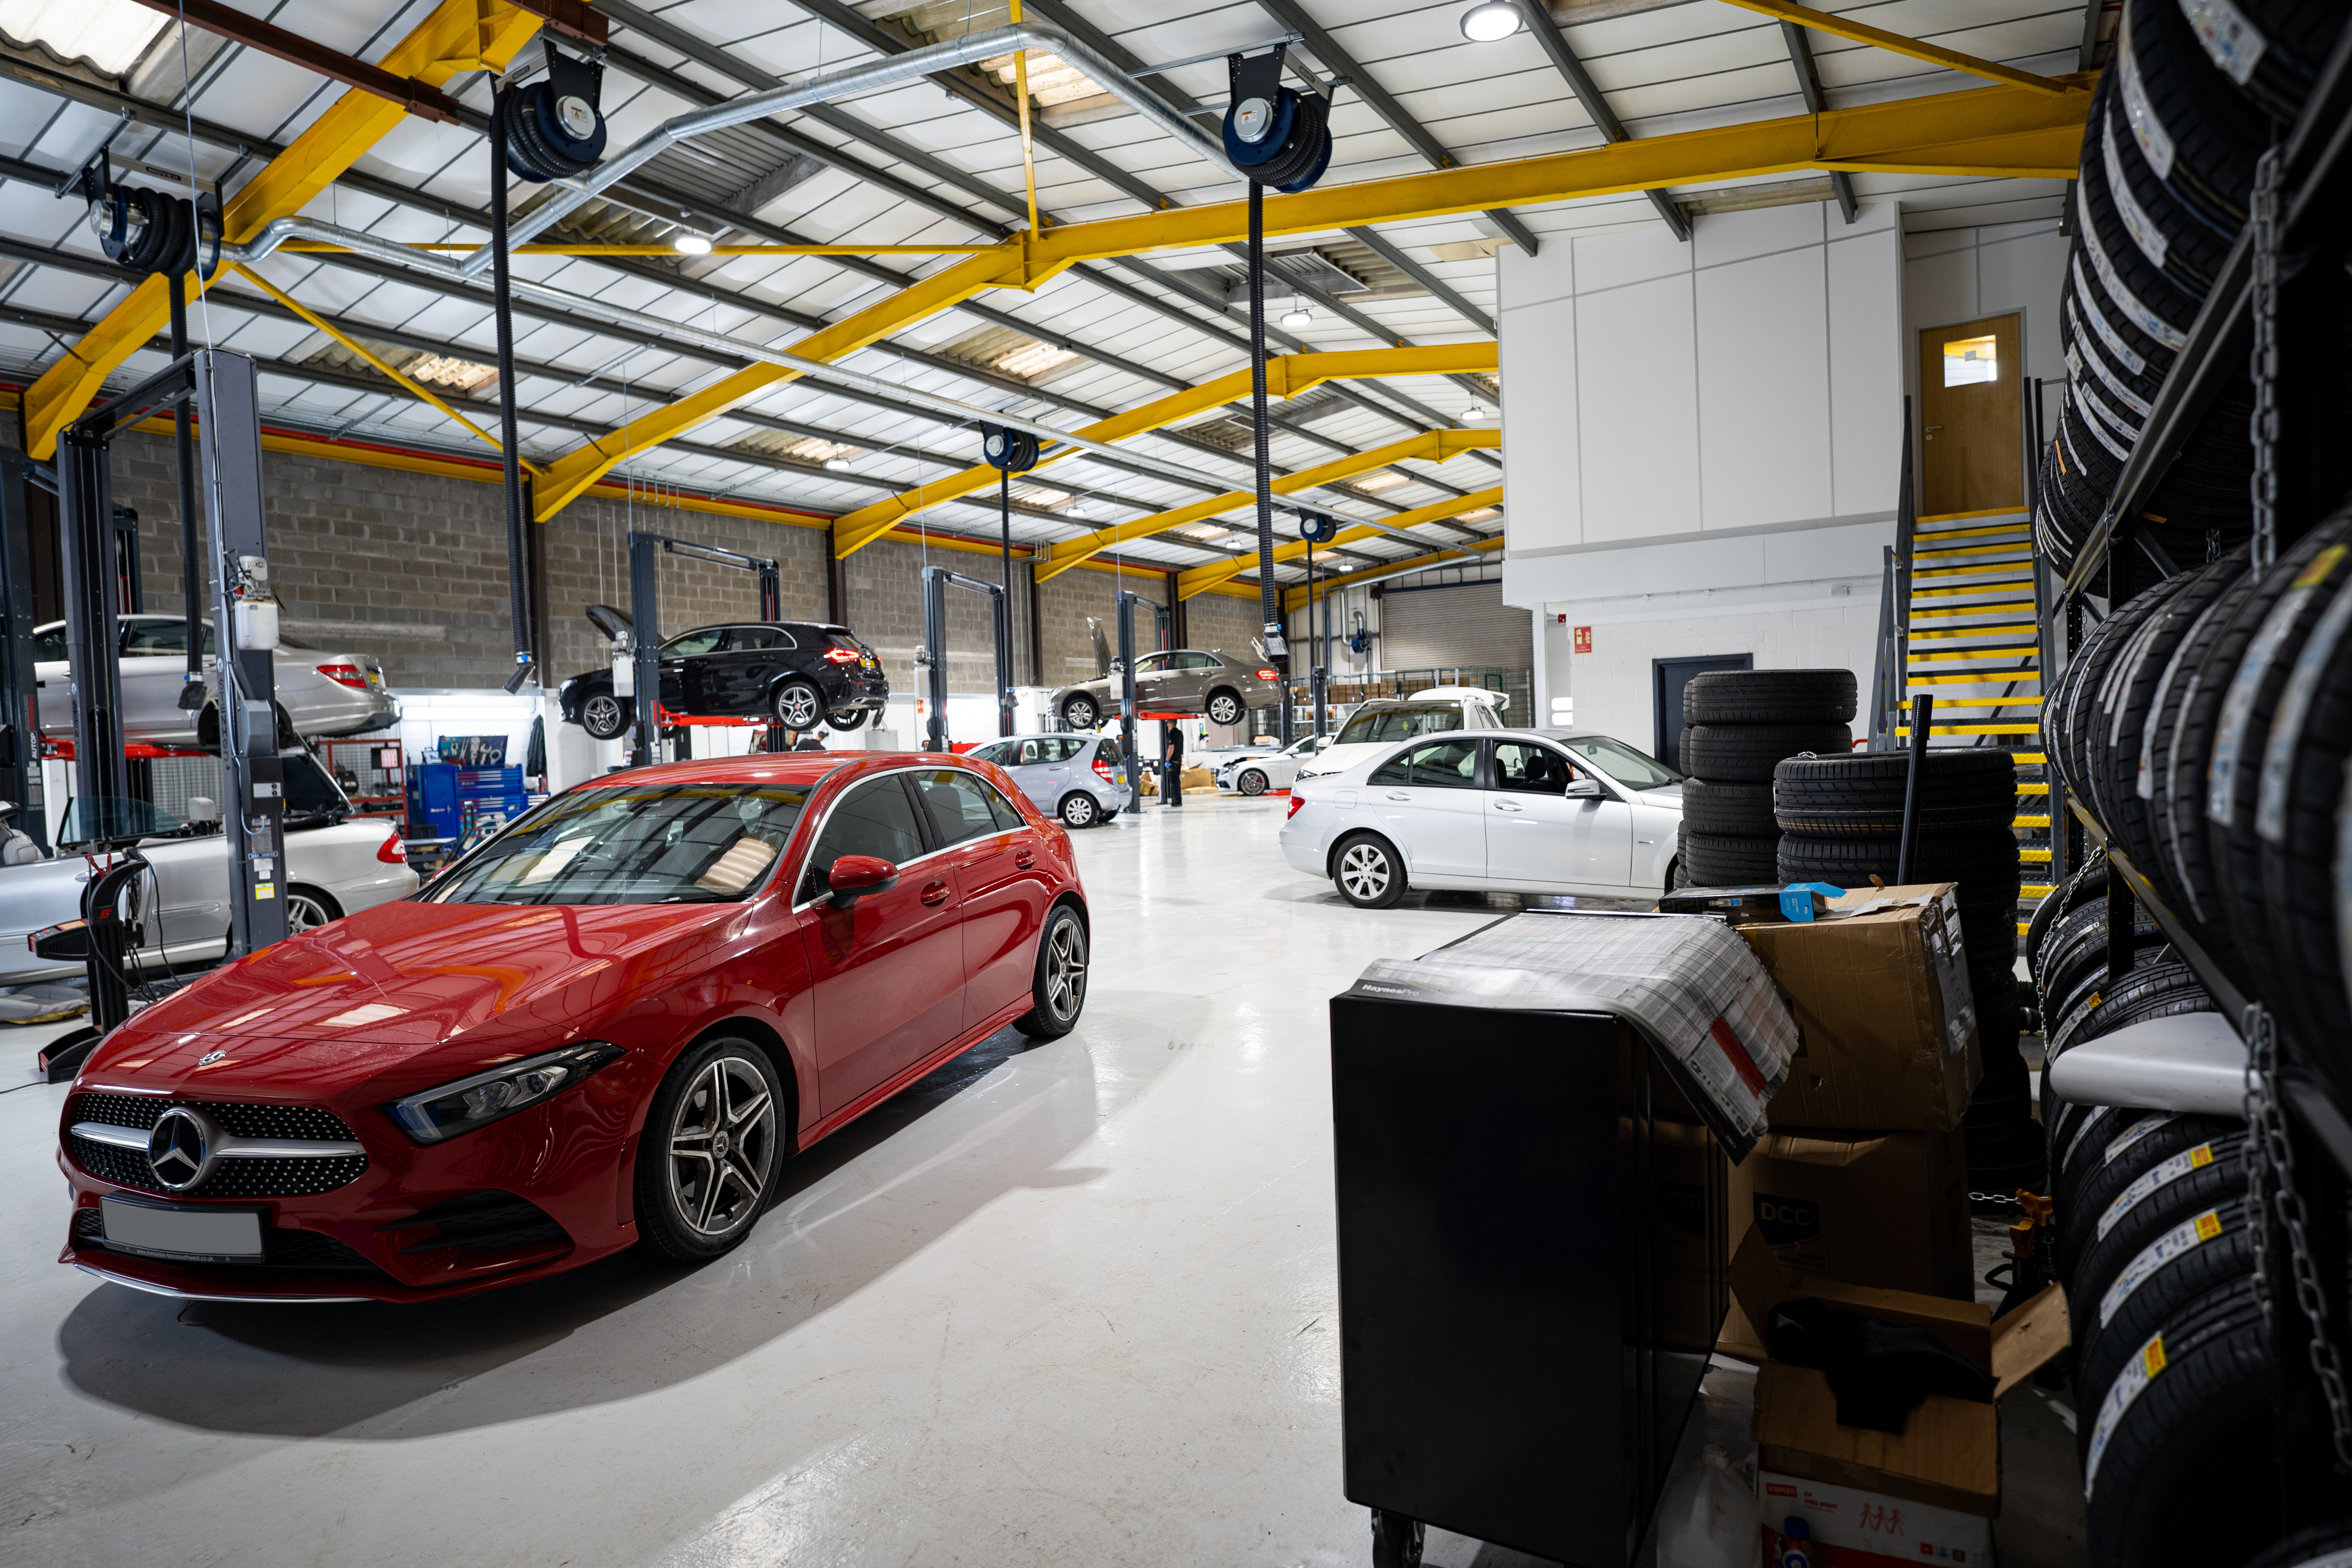 MERCEDES-BENZ SOUTH WEST COMPLETE EXPANSION IN ESTOVER, PLYMOUTH